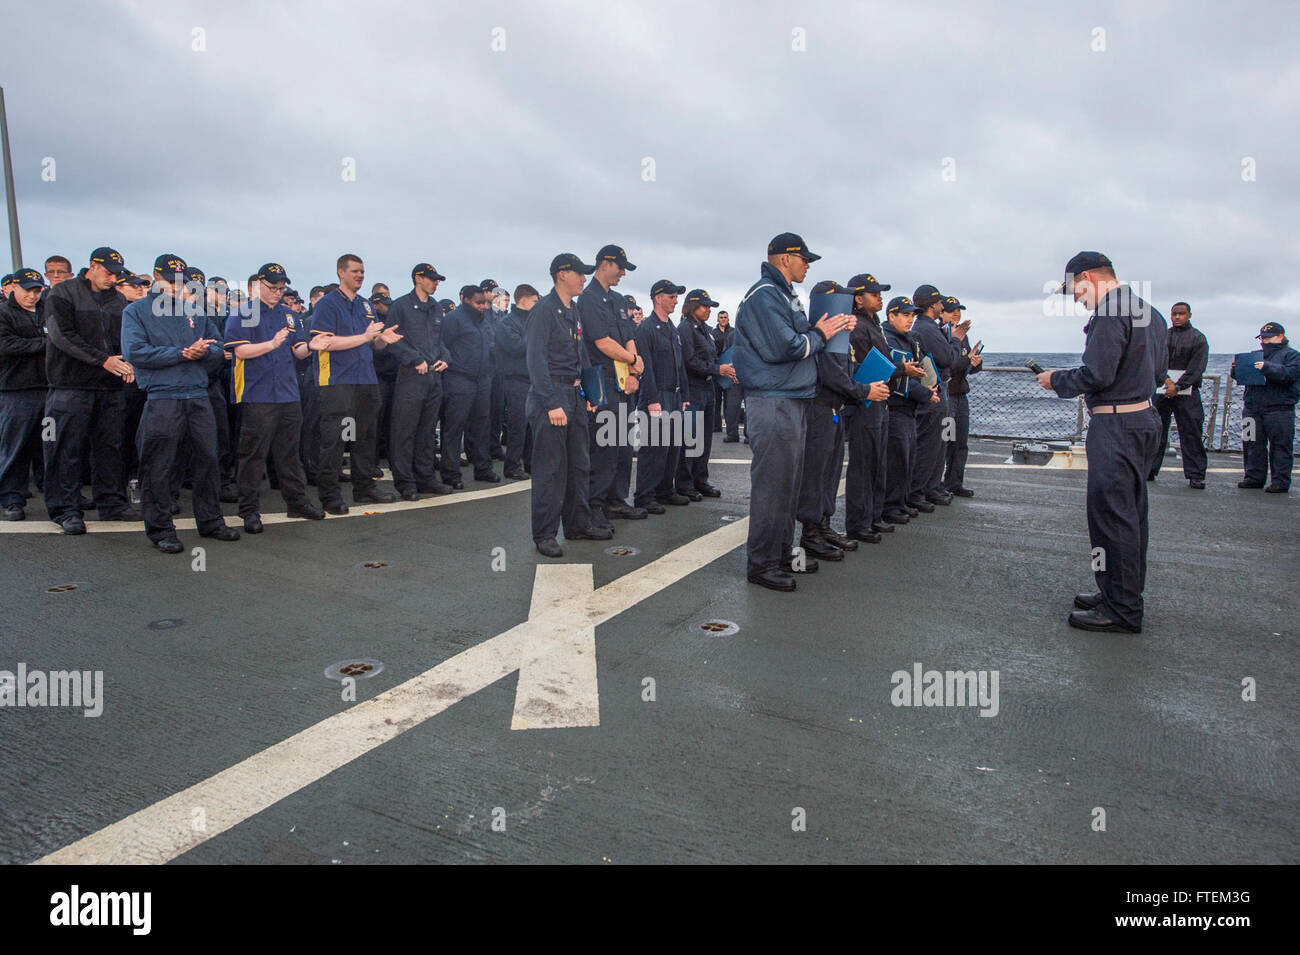 ATLANTIC OCEAN (Feb. 21, 2015) USS Laboon (DDG 58) Commanding Officer Cmdr. Christopher M. McCallum updates Sailors on upcoming operations during an all-hands call on the flight deck Feb. 21, 2015. Laboon, an Arleigh Burke-class guided-missile destroyer, homeported in Norfolk, is conducting naval operations in the U.S. 6th Fleet area of operations in support of U.S. national security interests in Europe. Stock Photo